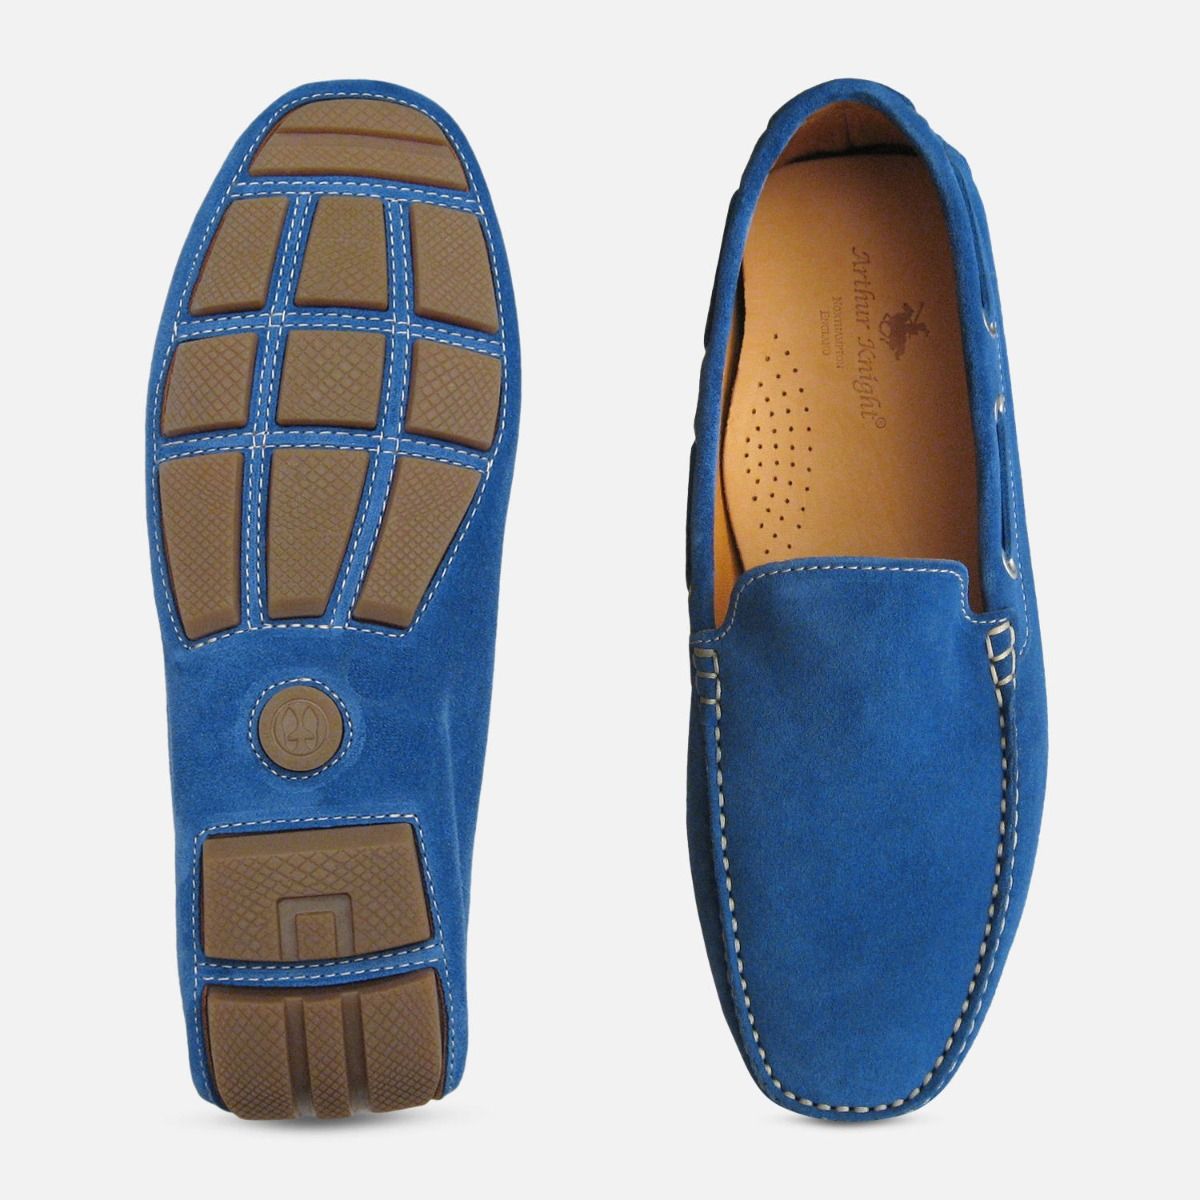 Blue Suede Driving Shoes for Men